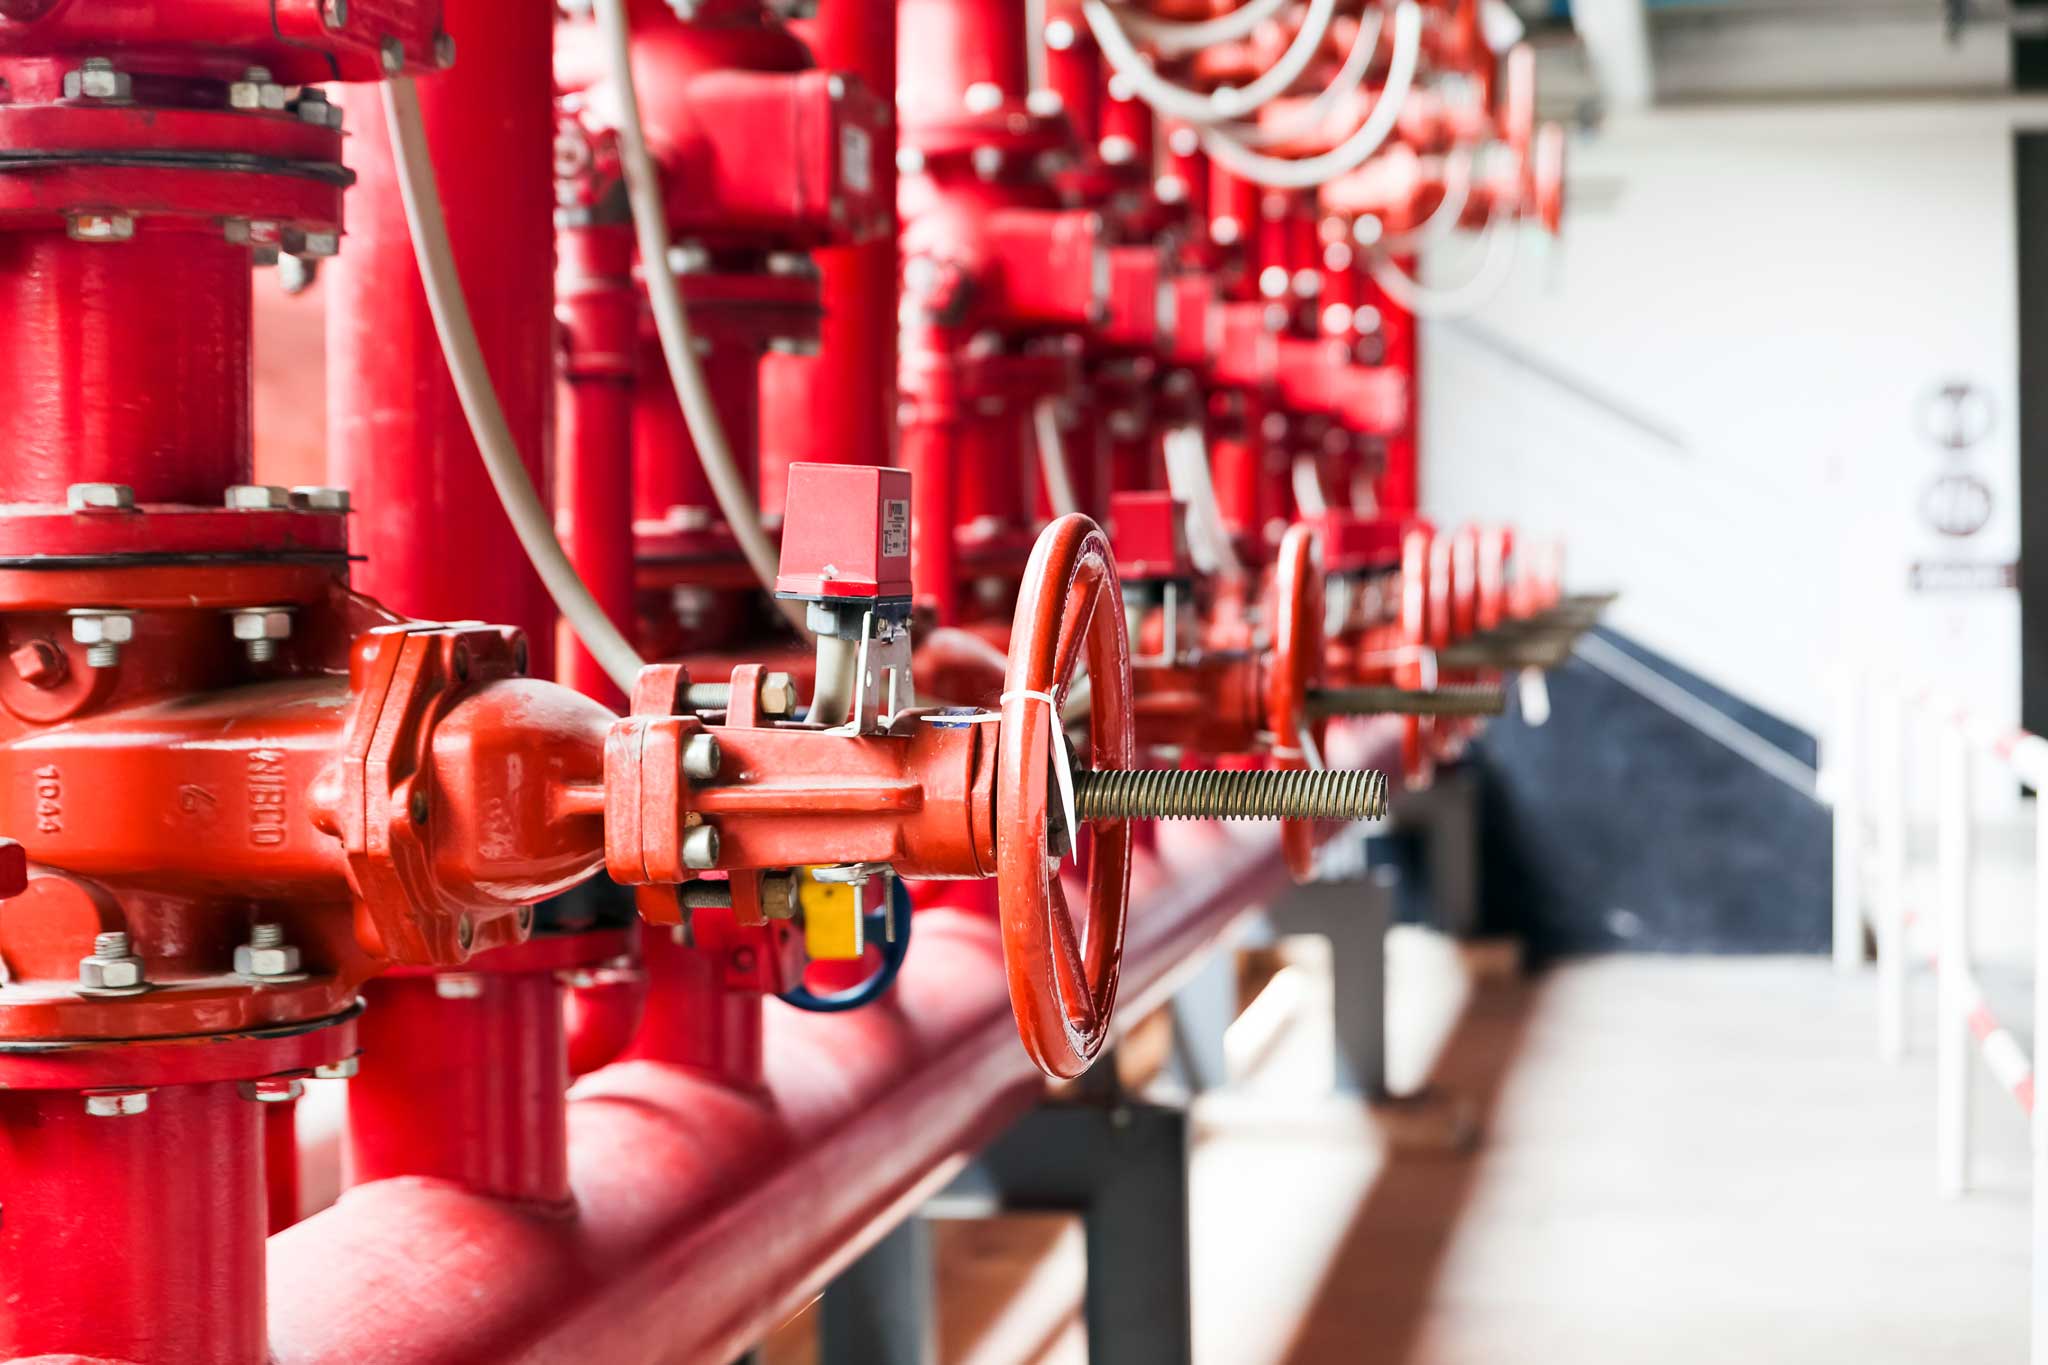 Fire Sprinkler systems look complicated but follow a few simple factors.